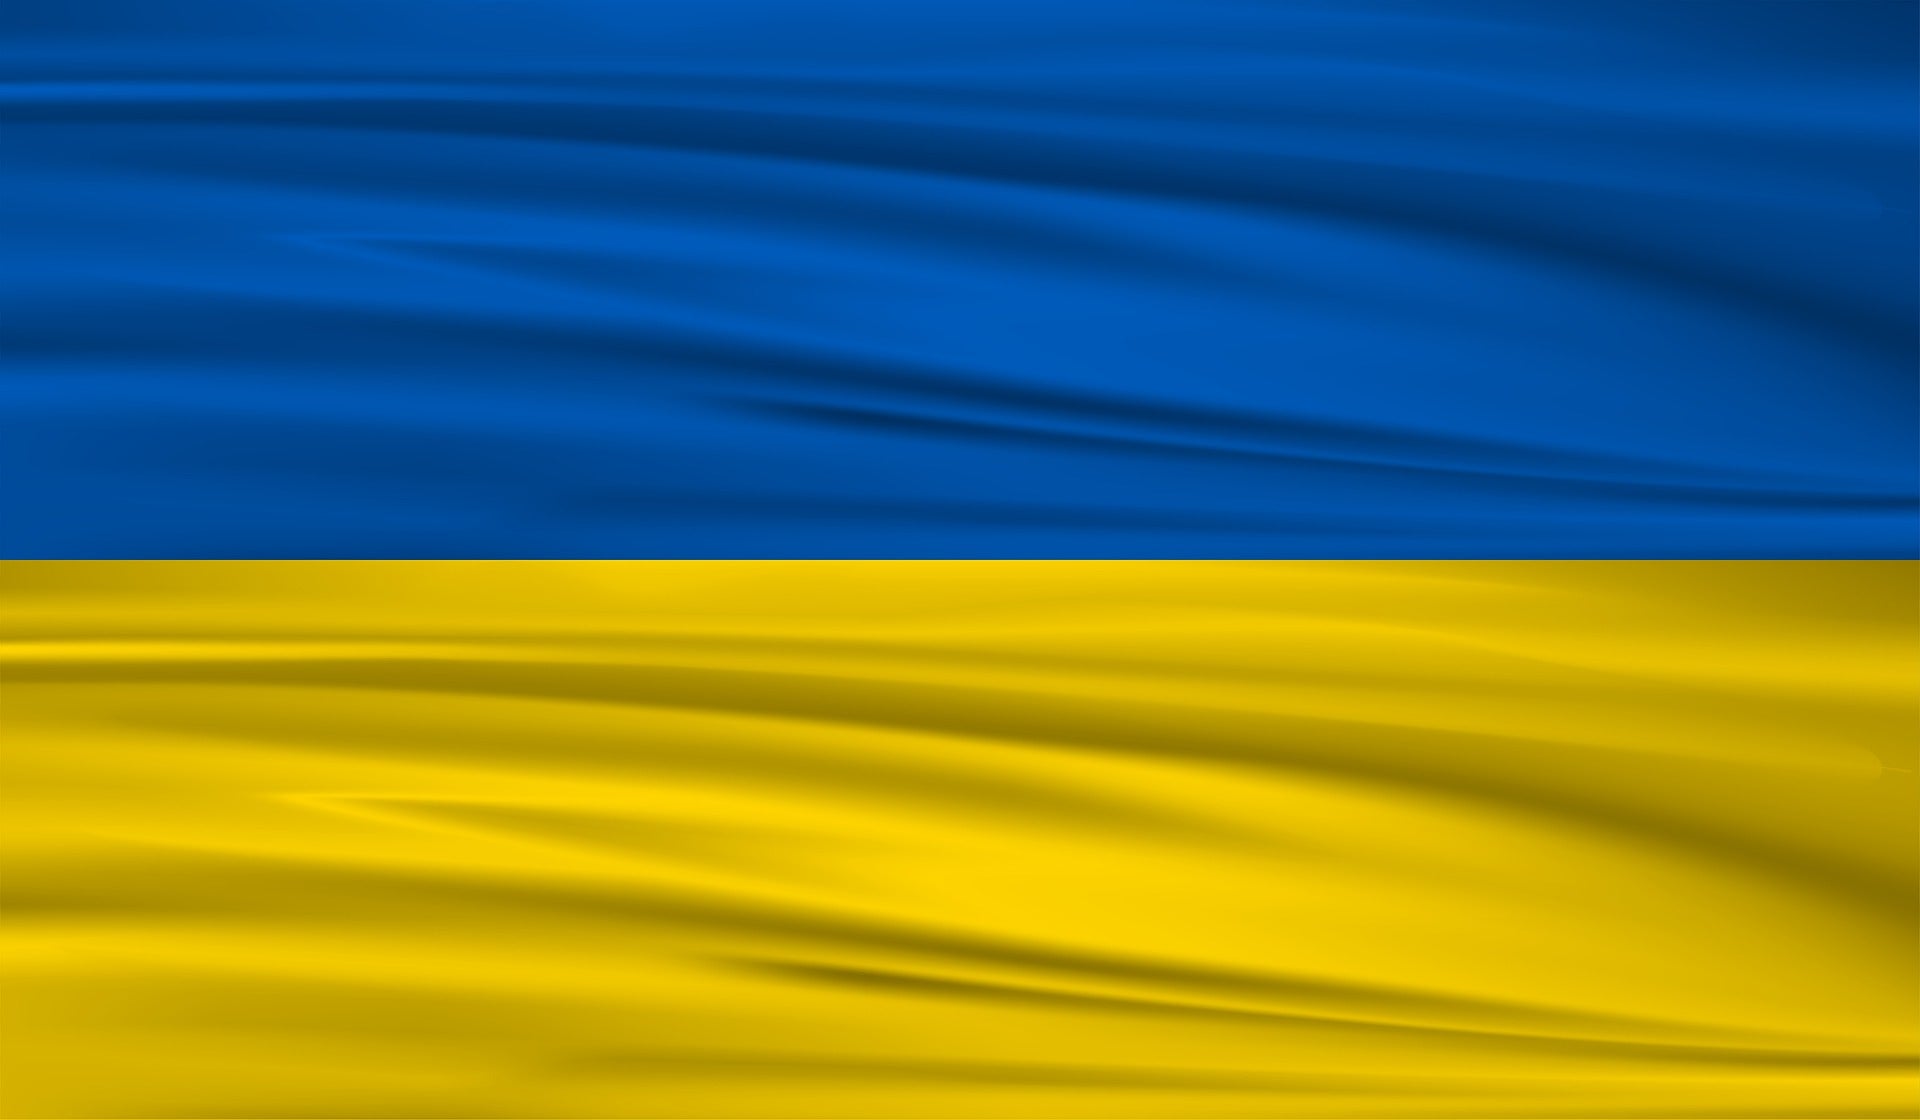 Ukraine-Russia war further heightens cyber risk, but price will remain an obstacle to SMEs